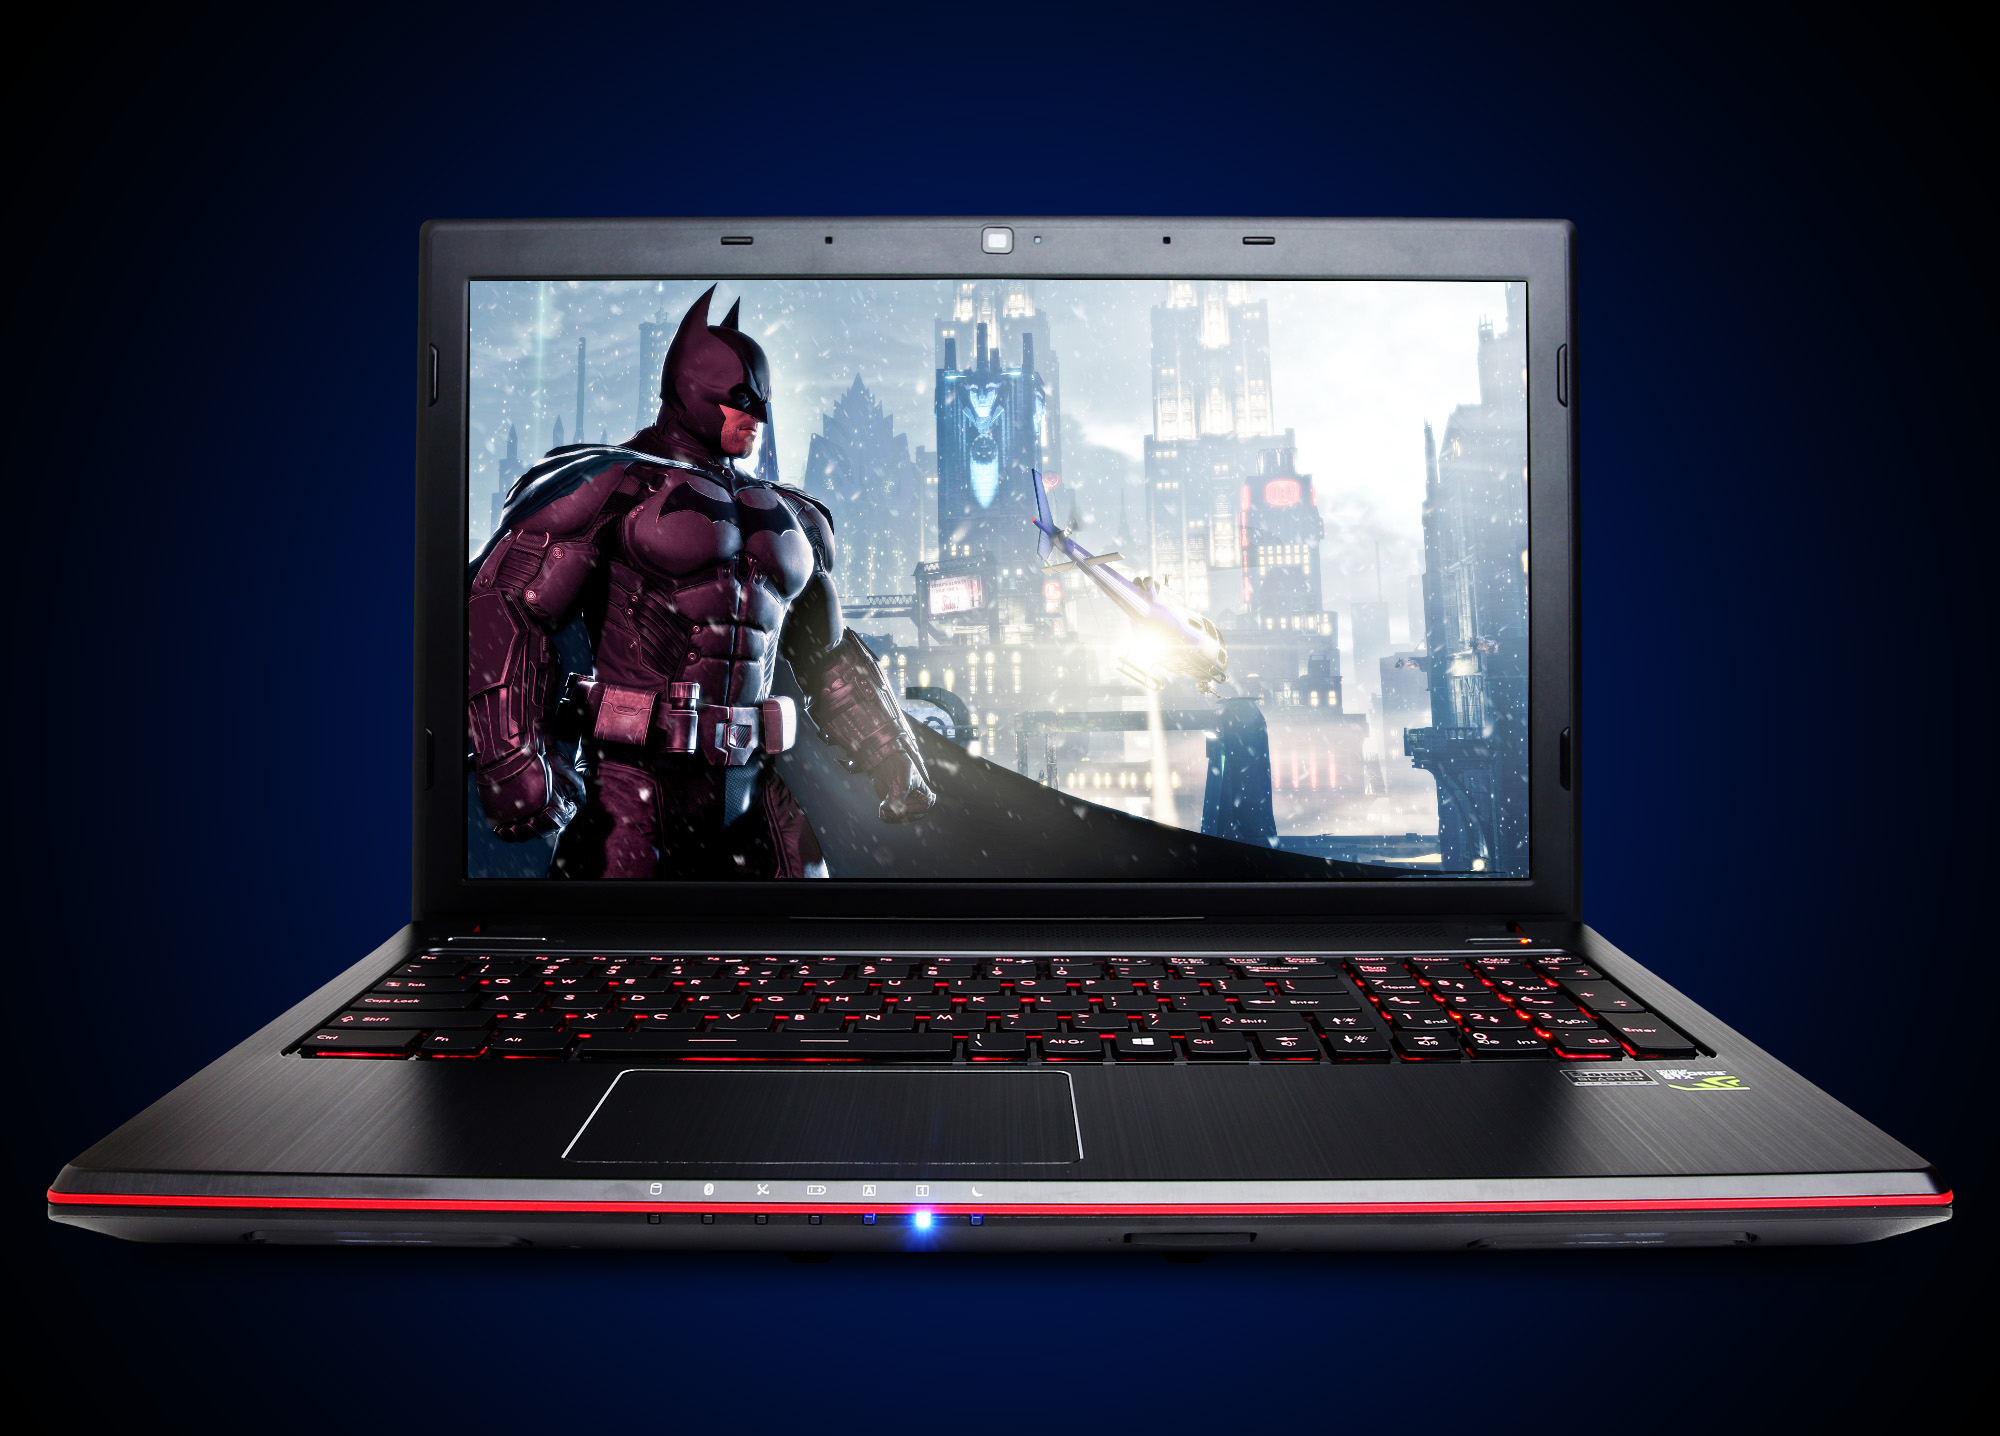 Gaming laptop specs, gamers are looking for.